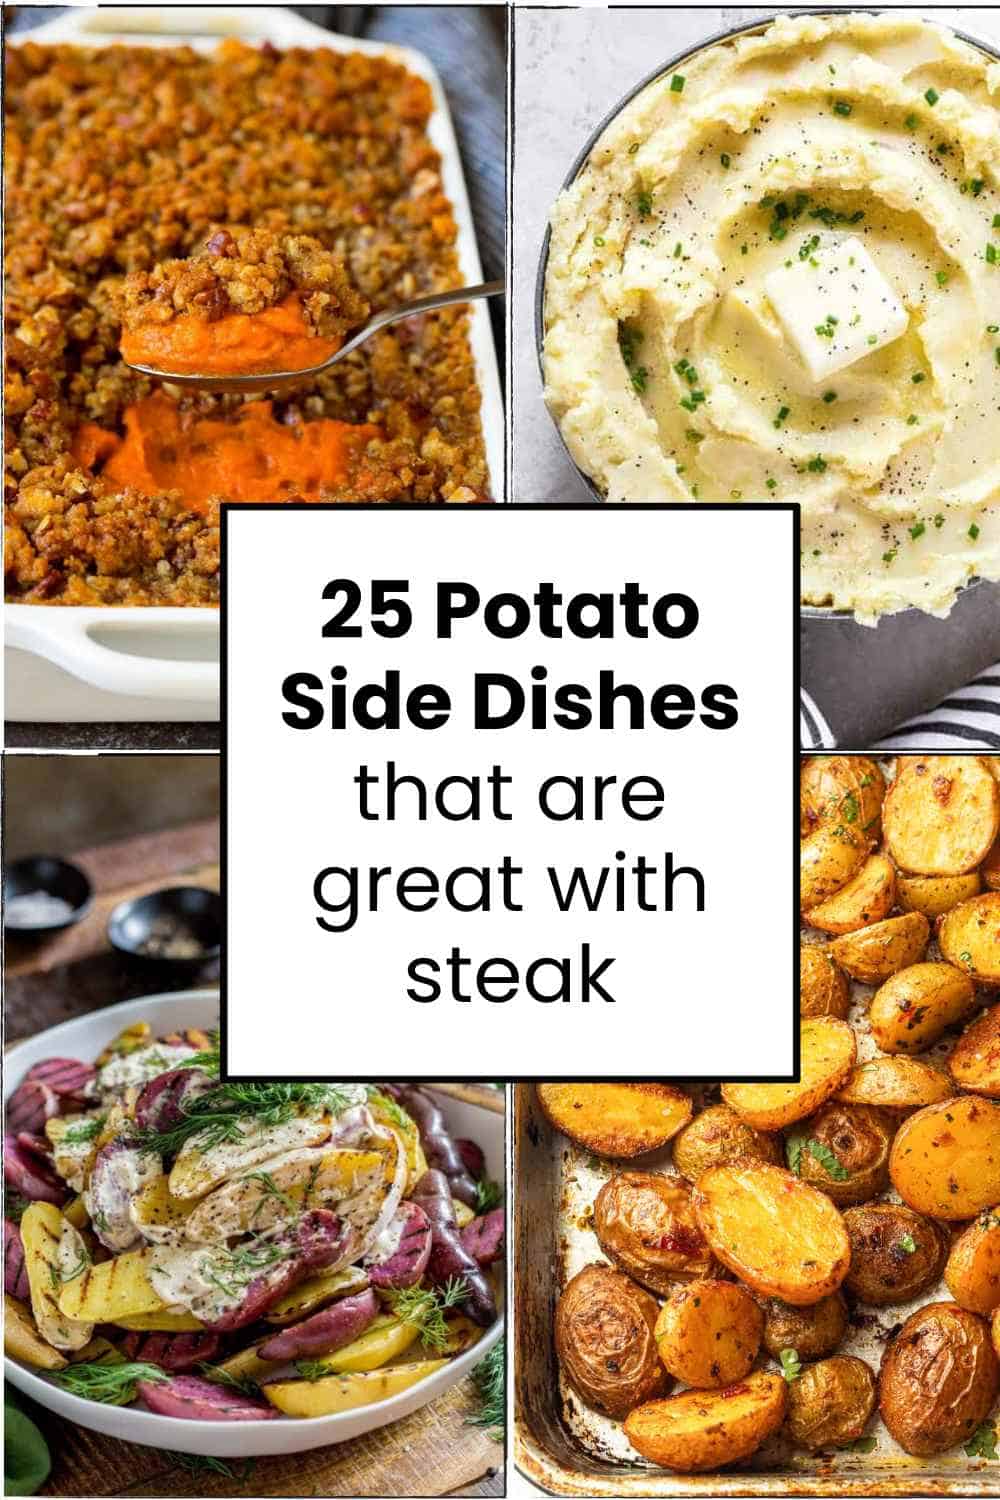 A collage of potato dishes.